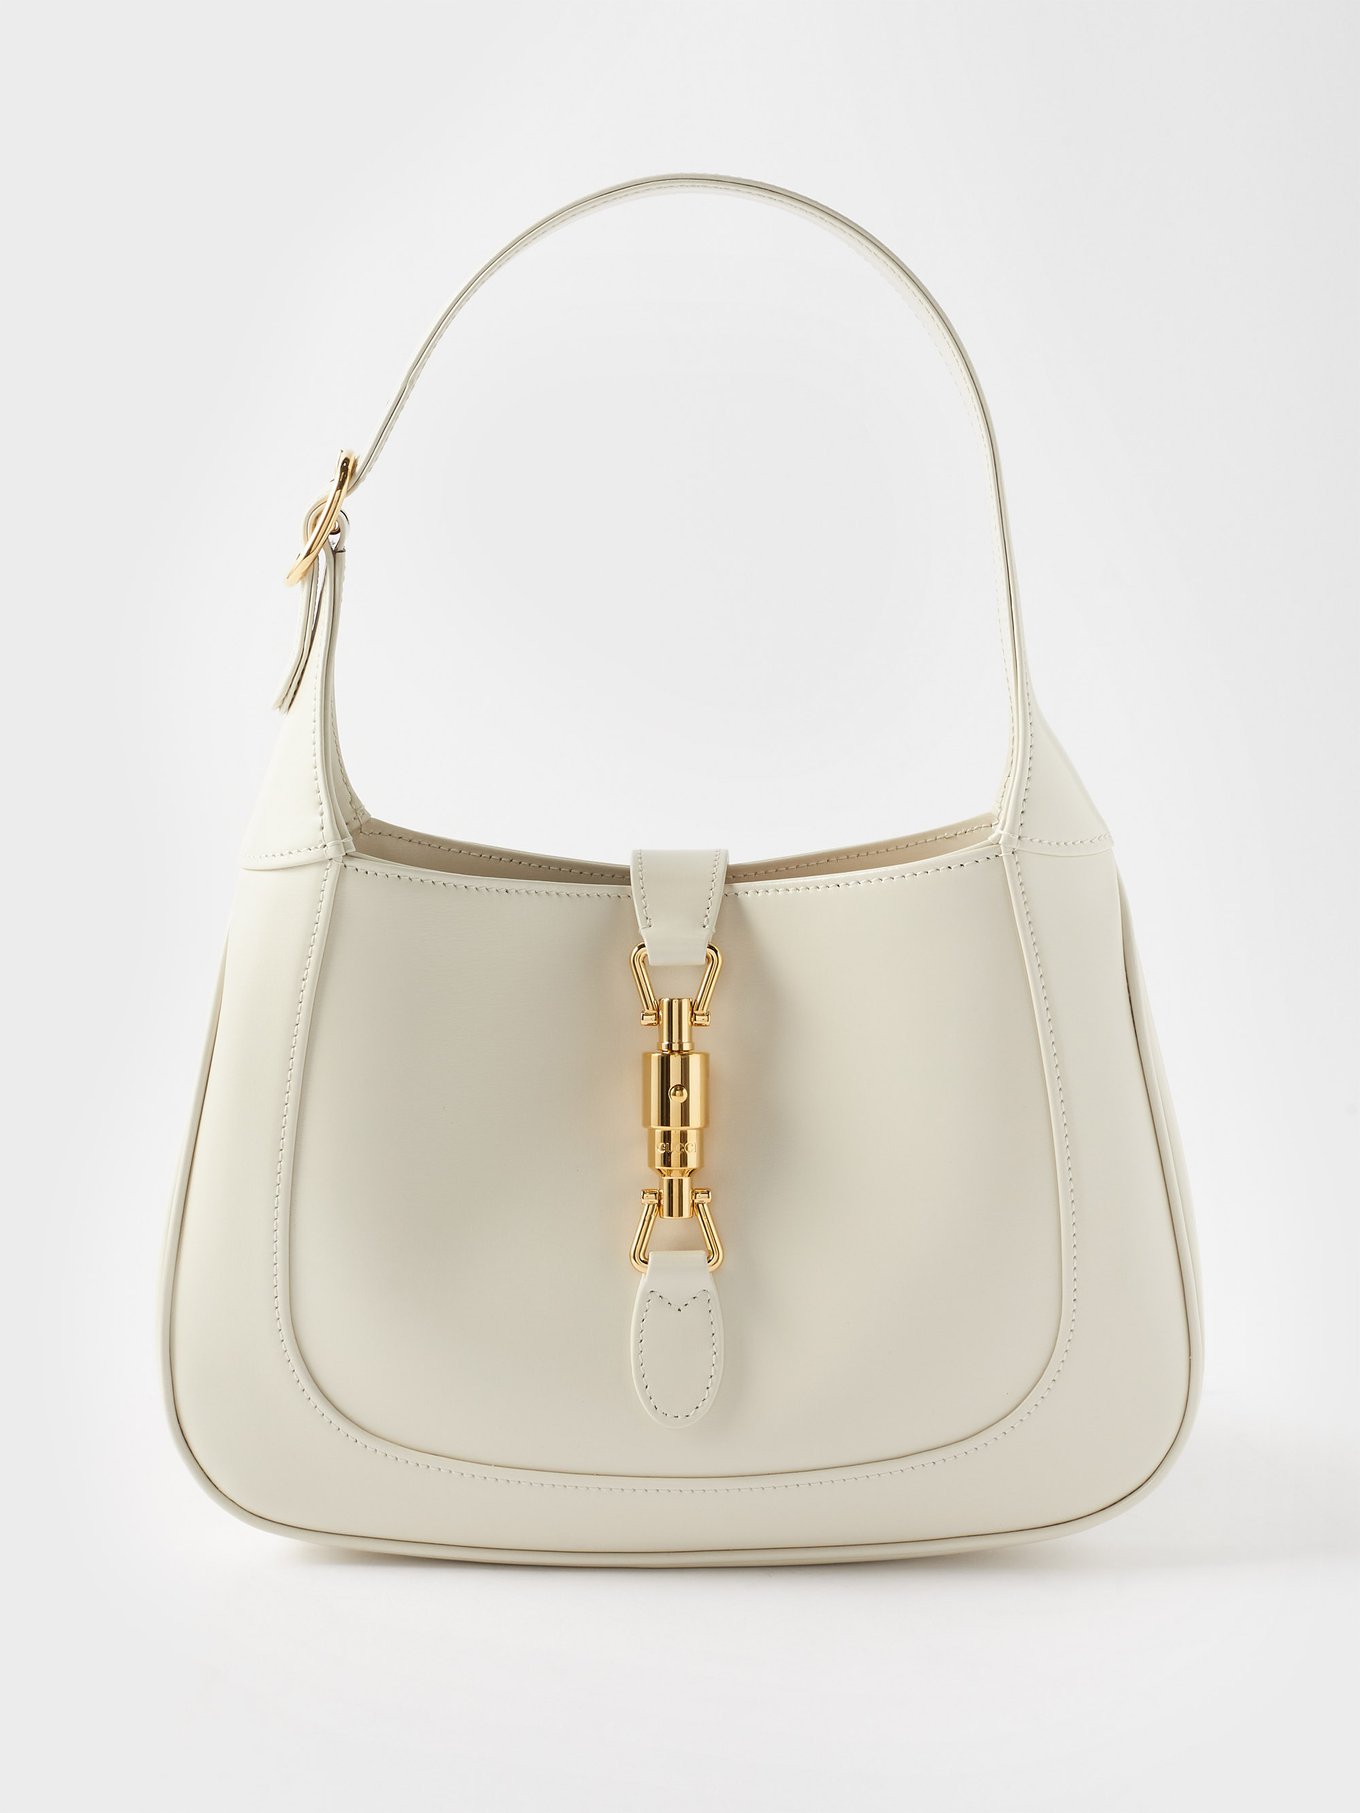 Gucci Jackie 1961 GG Small Shoulder Bag Beige and Blue New from